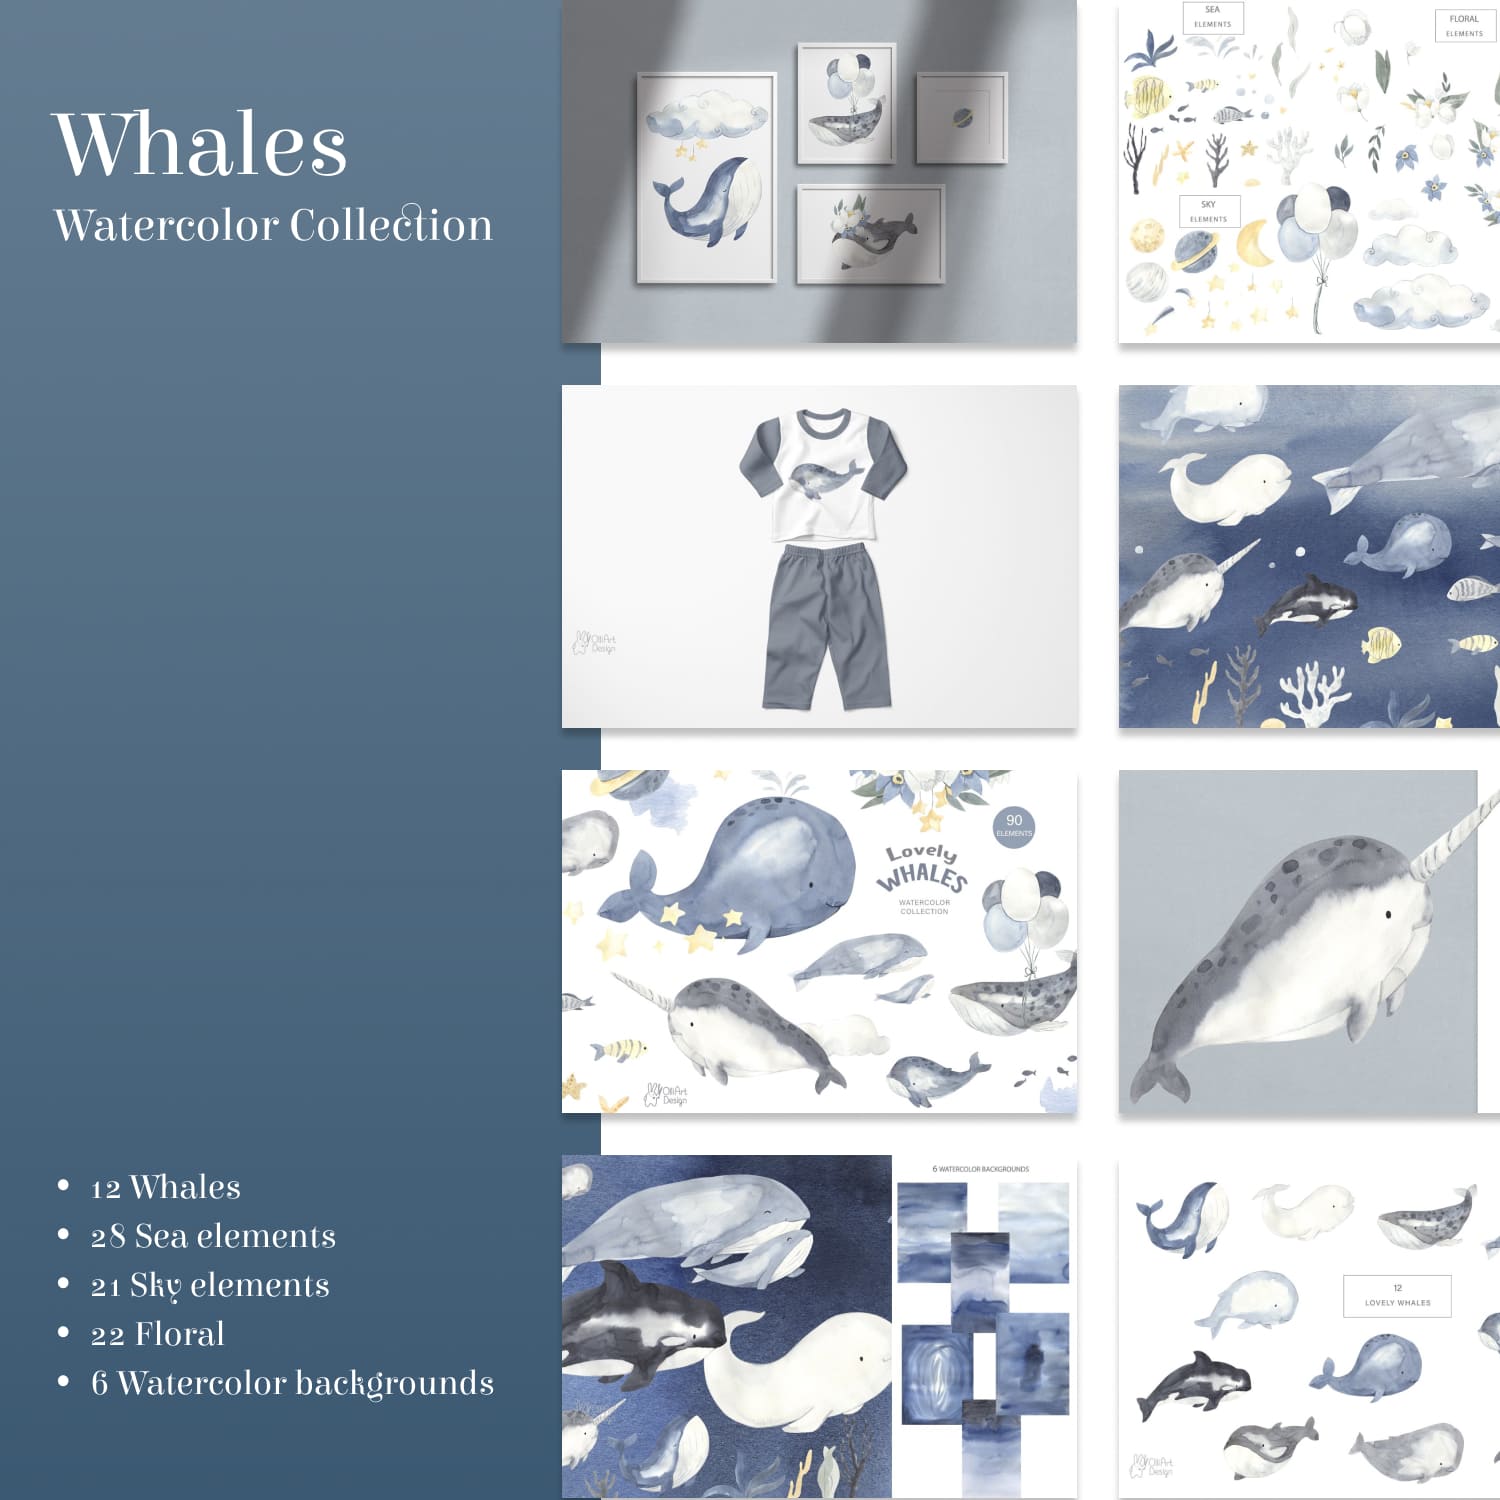 Lovely Whales Watercolor Collection cover image.